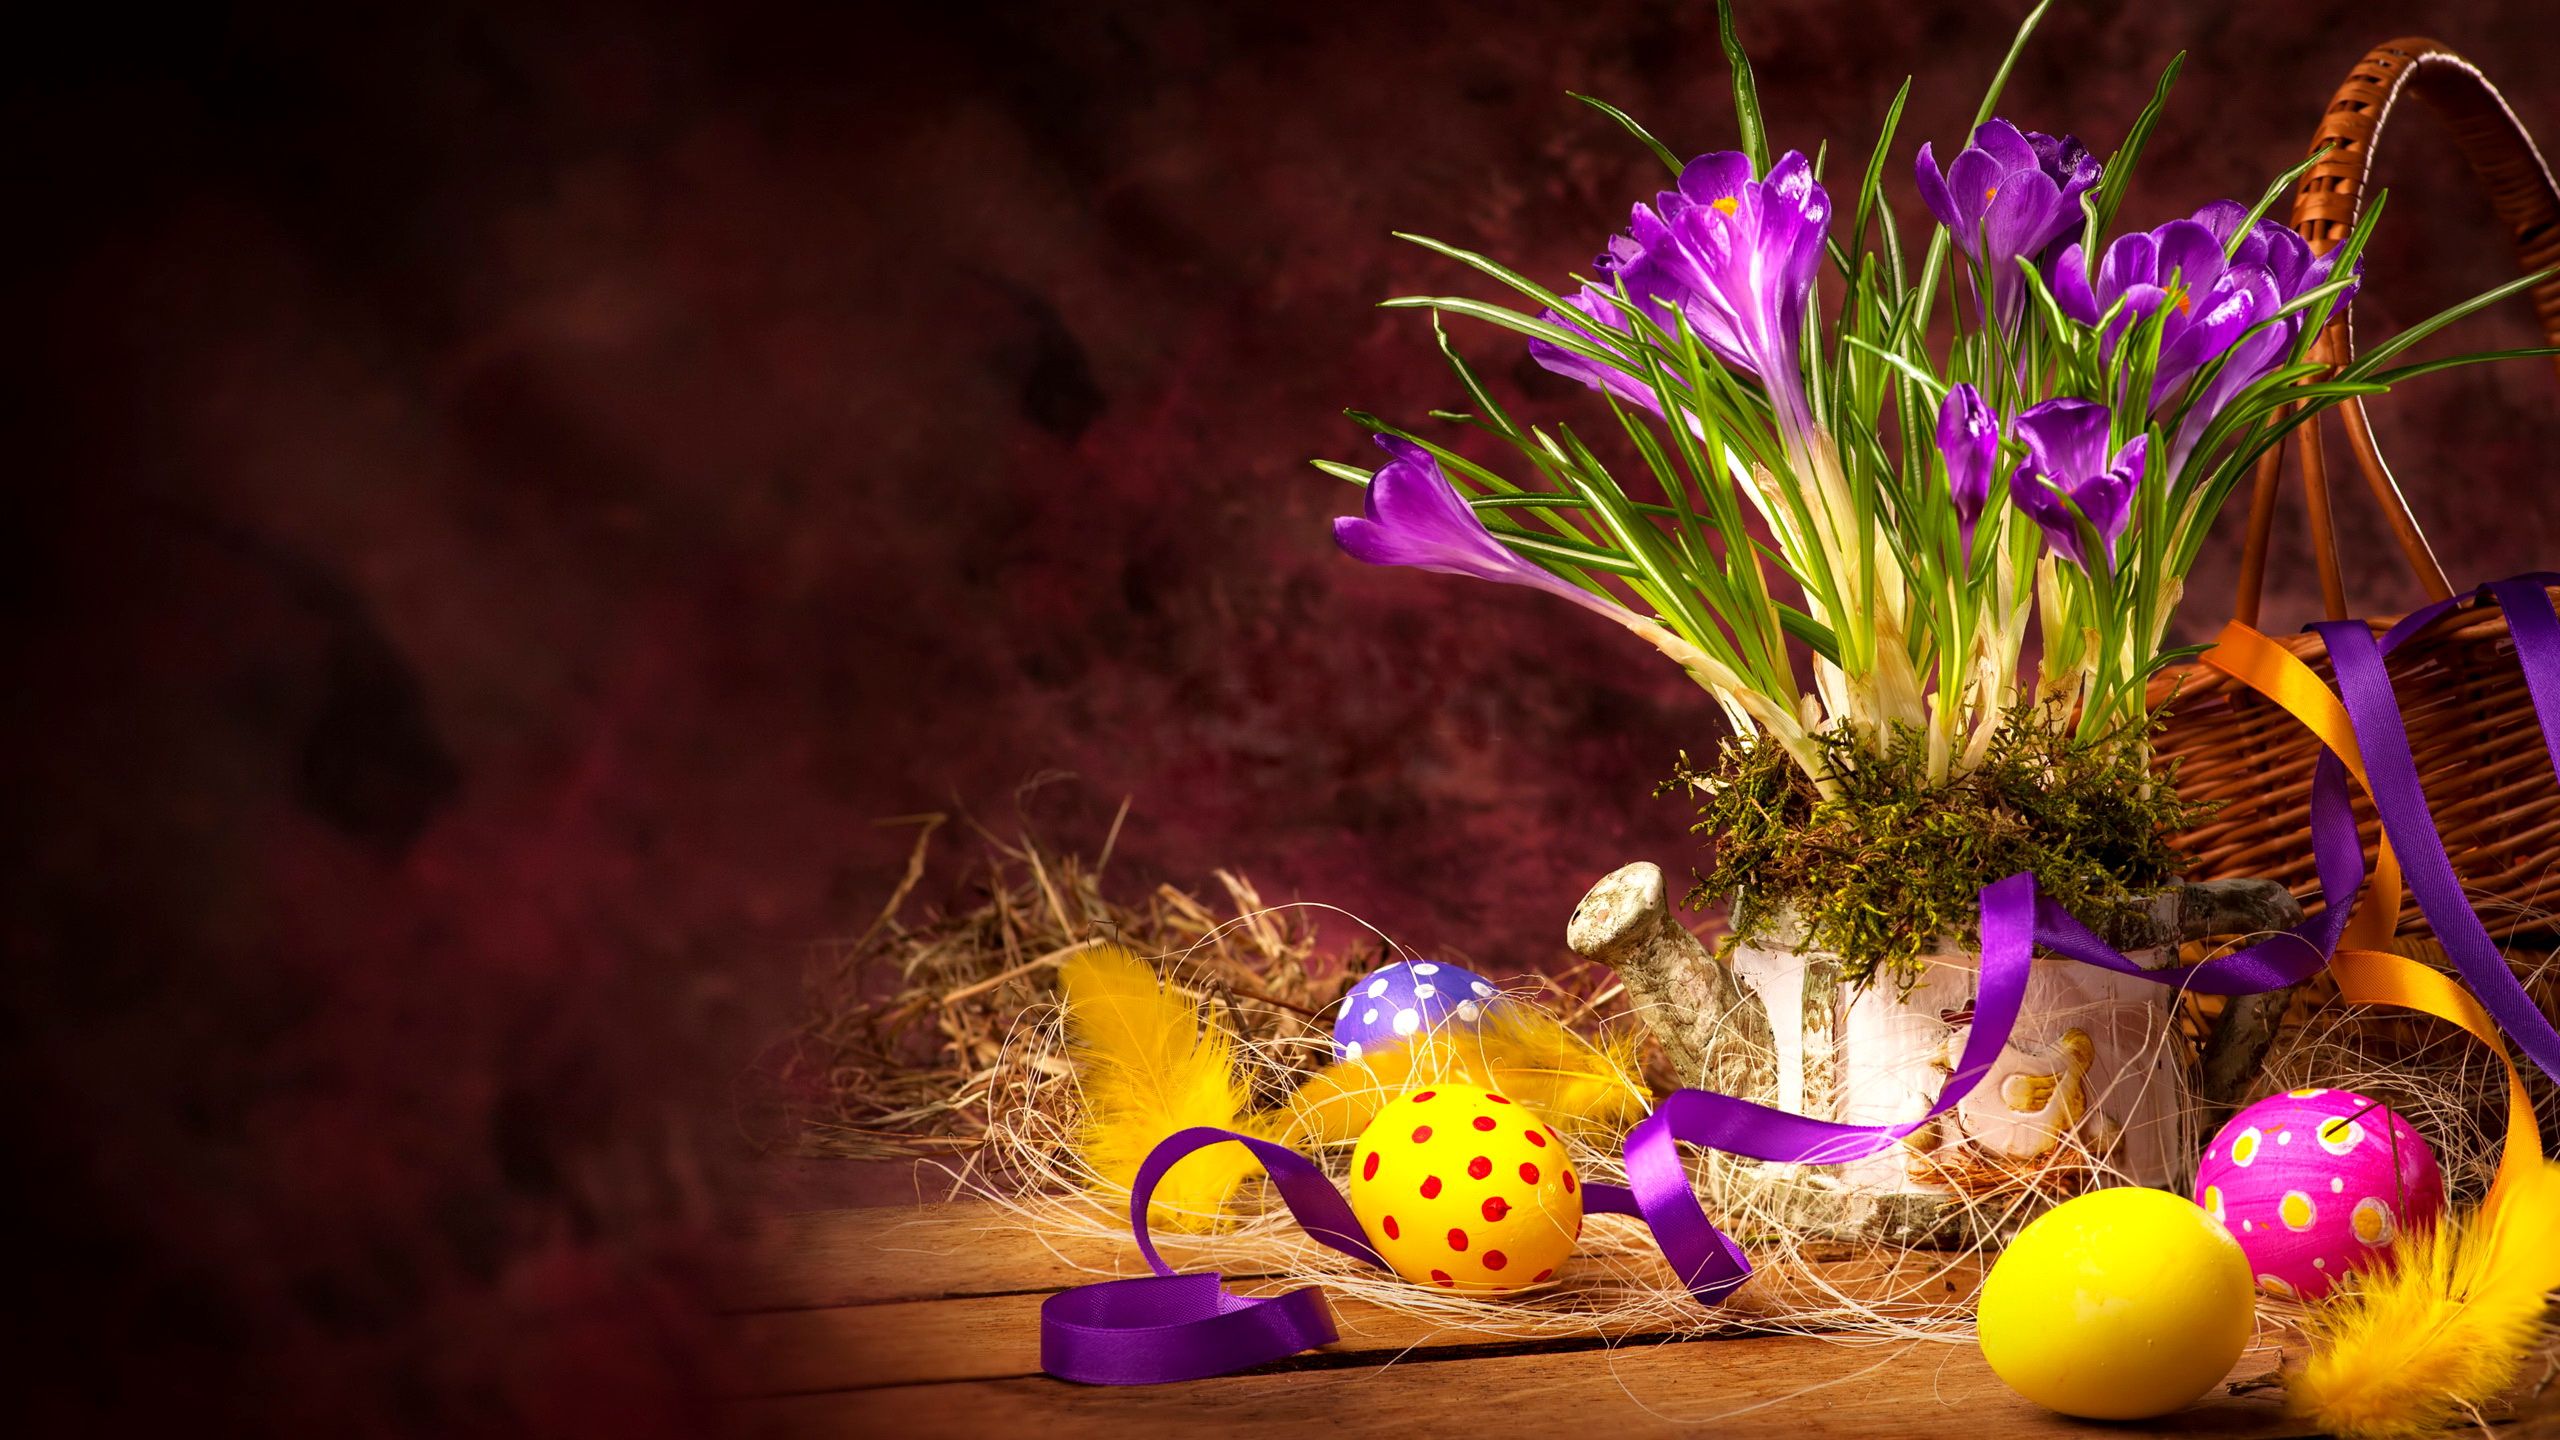 Happy Easter Images Hd - 2560x1440 Wallpaper 